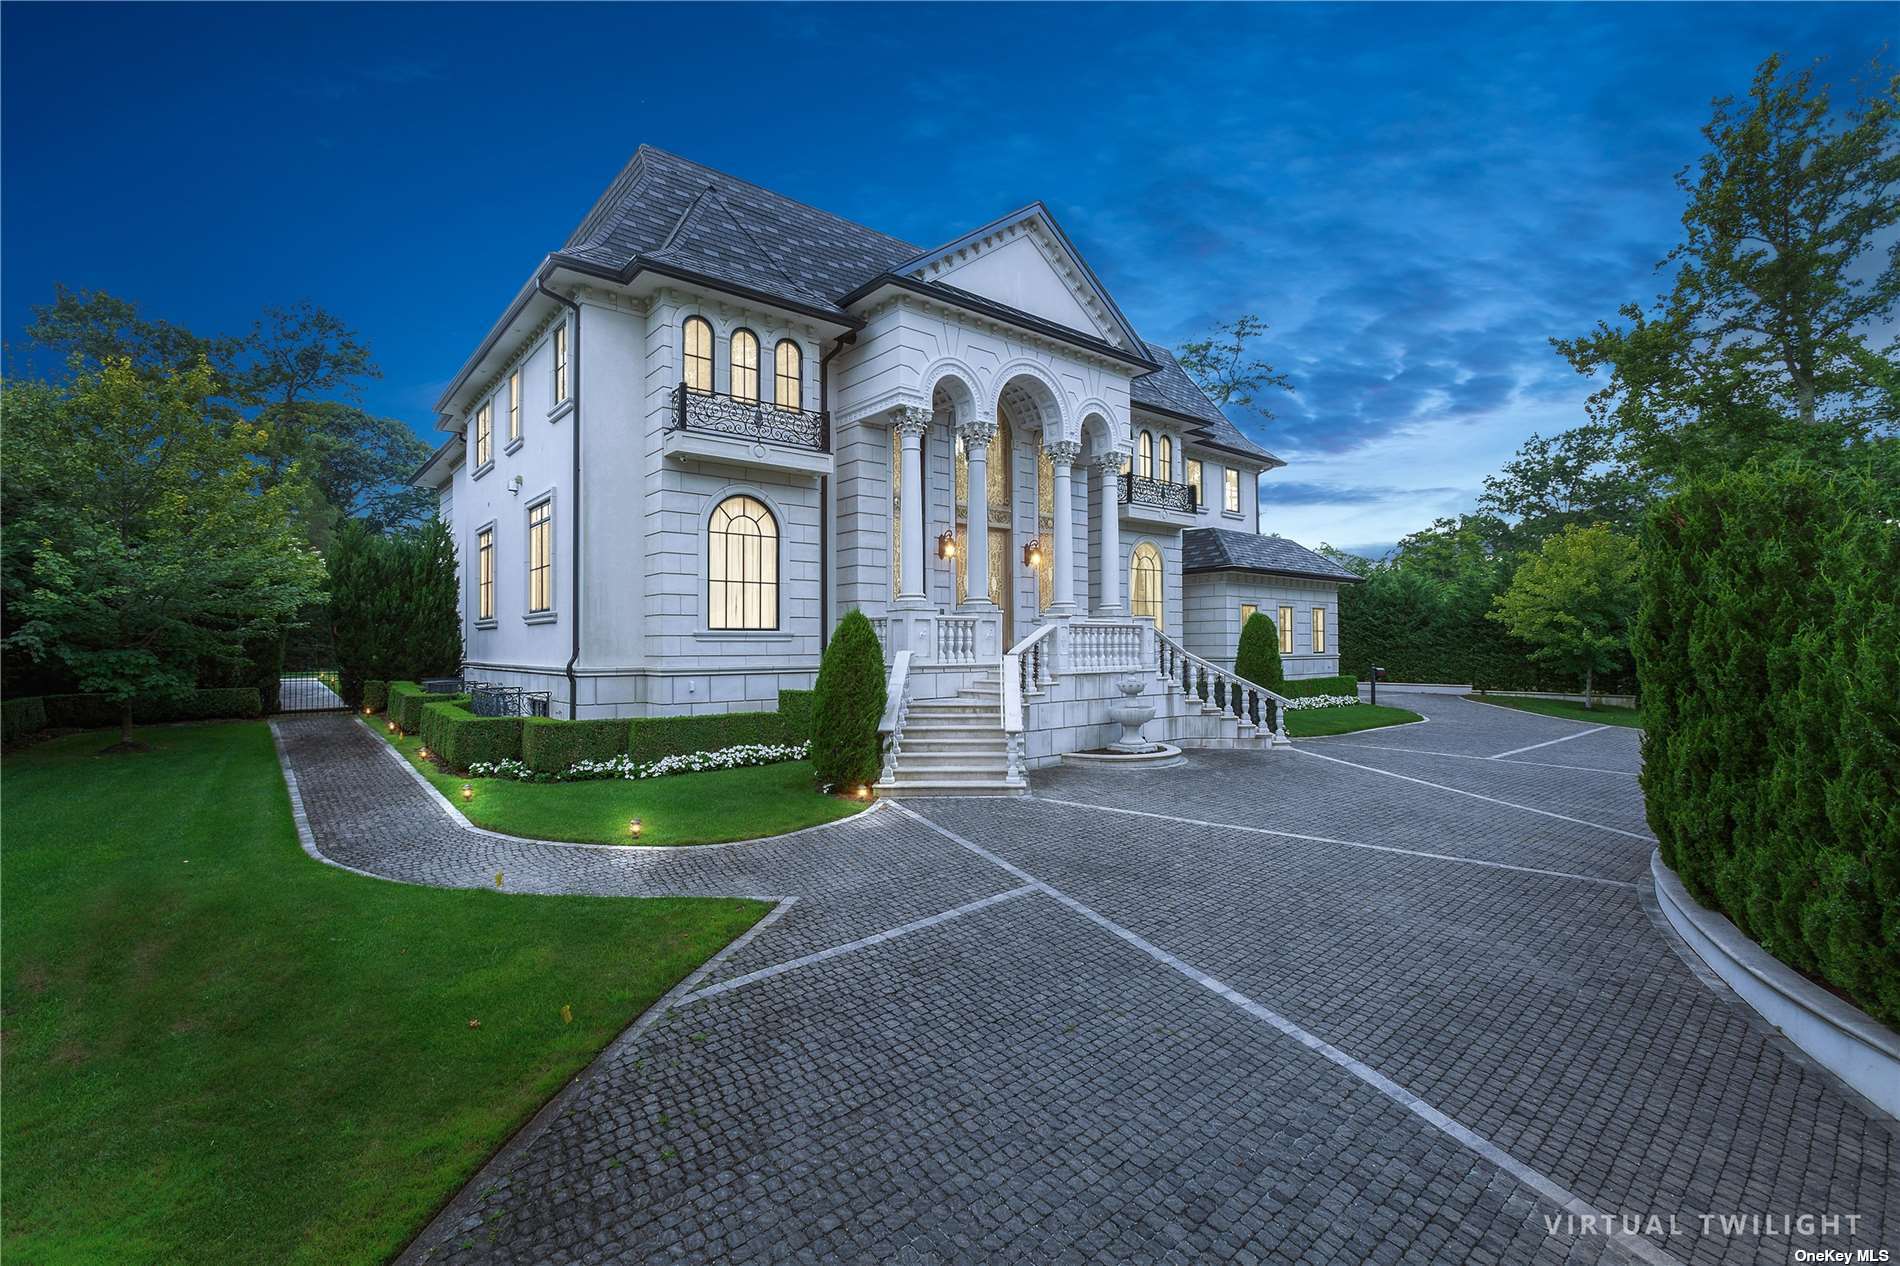 CRYPTOCURRENCY ACCEPTED AT PRIVATE AUCTION FOR LONG ISLAND MANSION Offered at $6,195,000.00